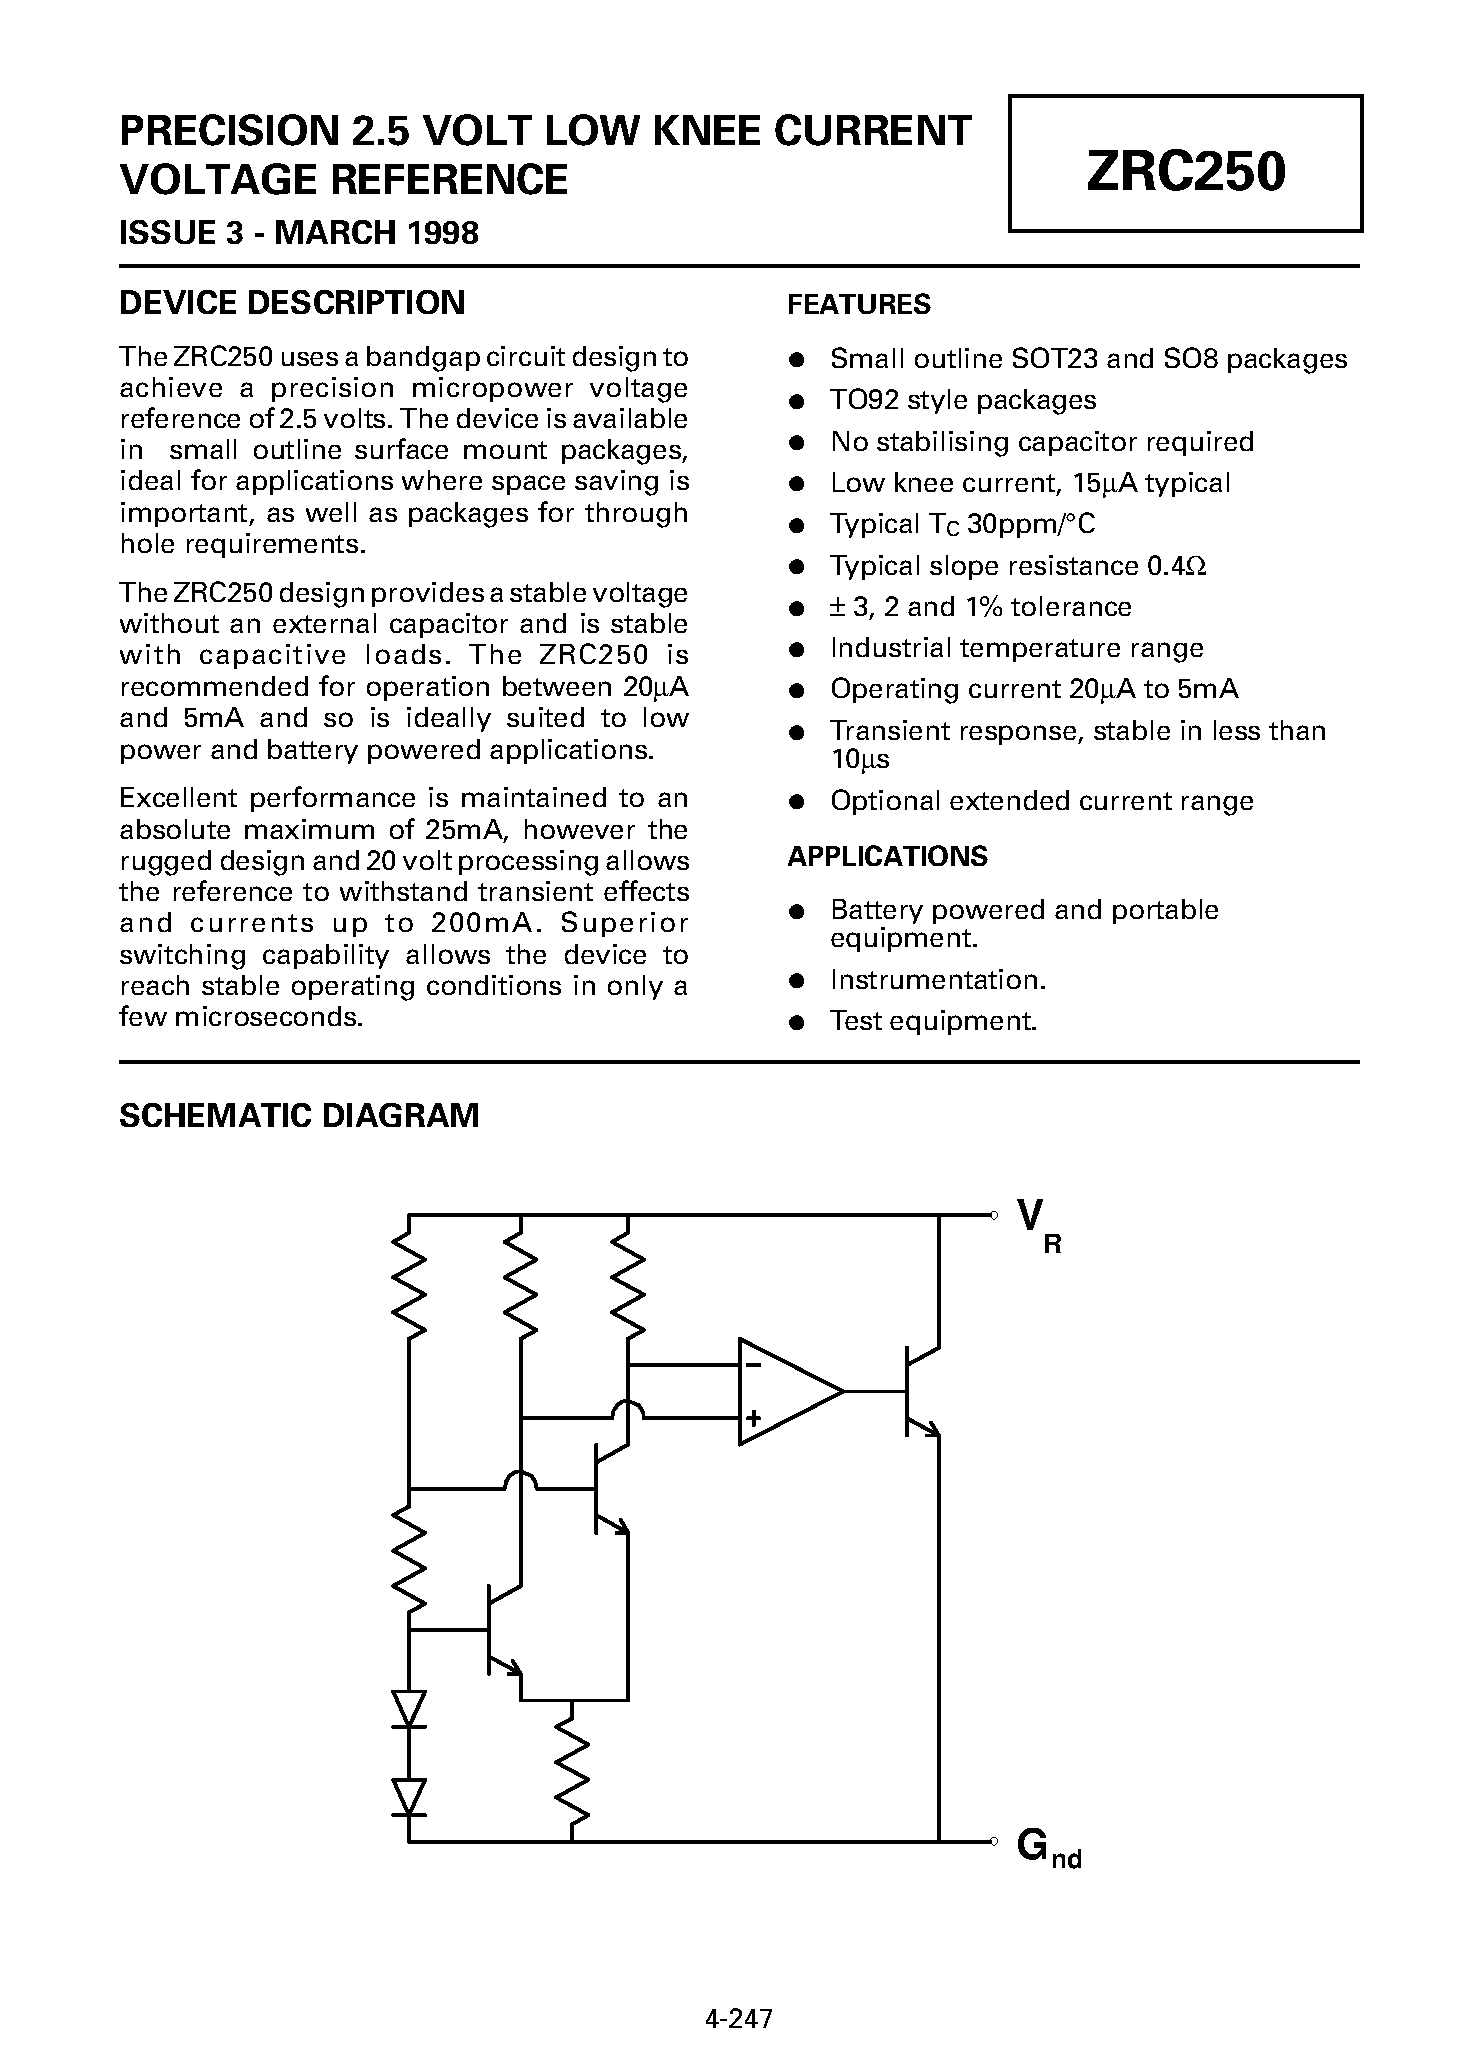 Datasheet ZRC250R03 - PRECISION 2.5 VOLT LOW KNEE CURRENT VOLTAGE REFERENCE page 1